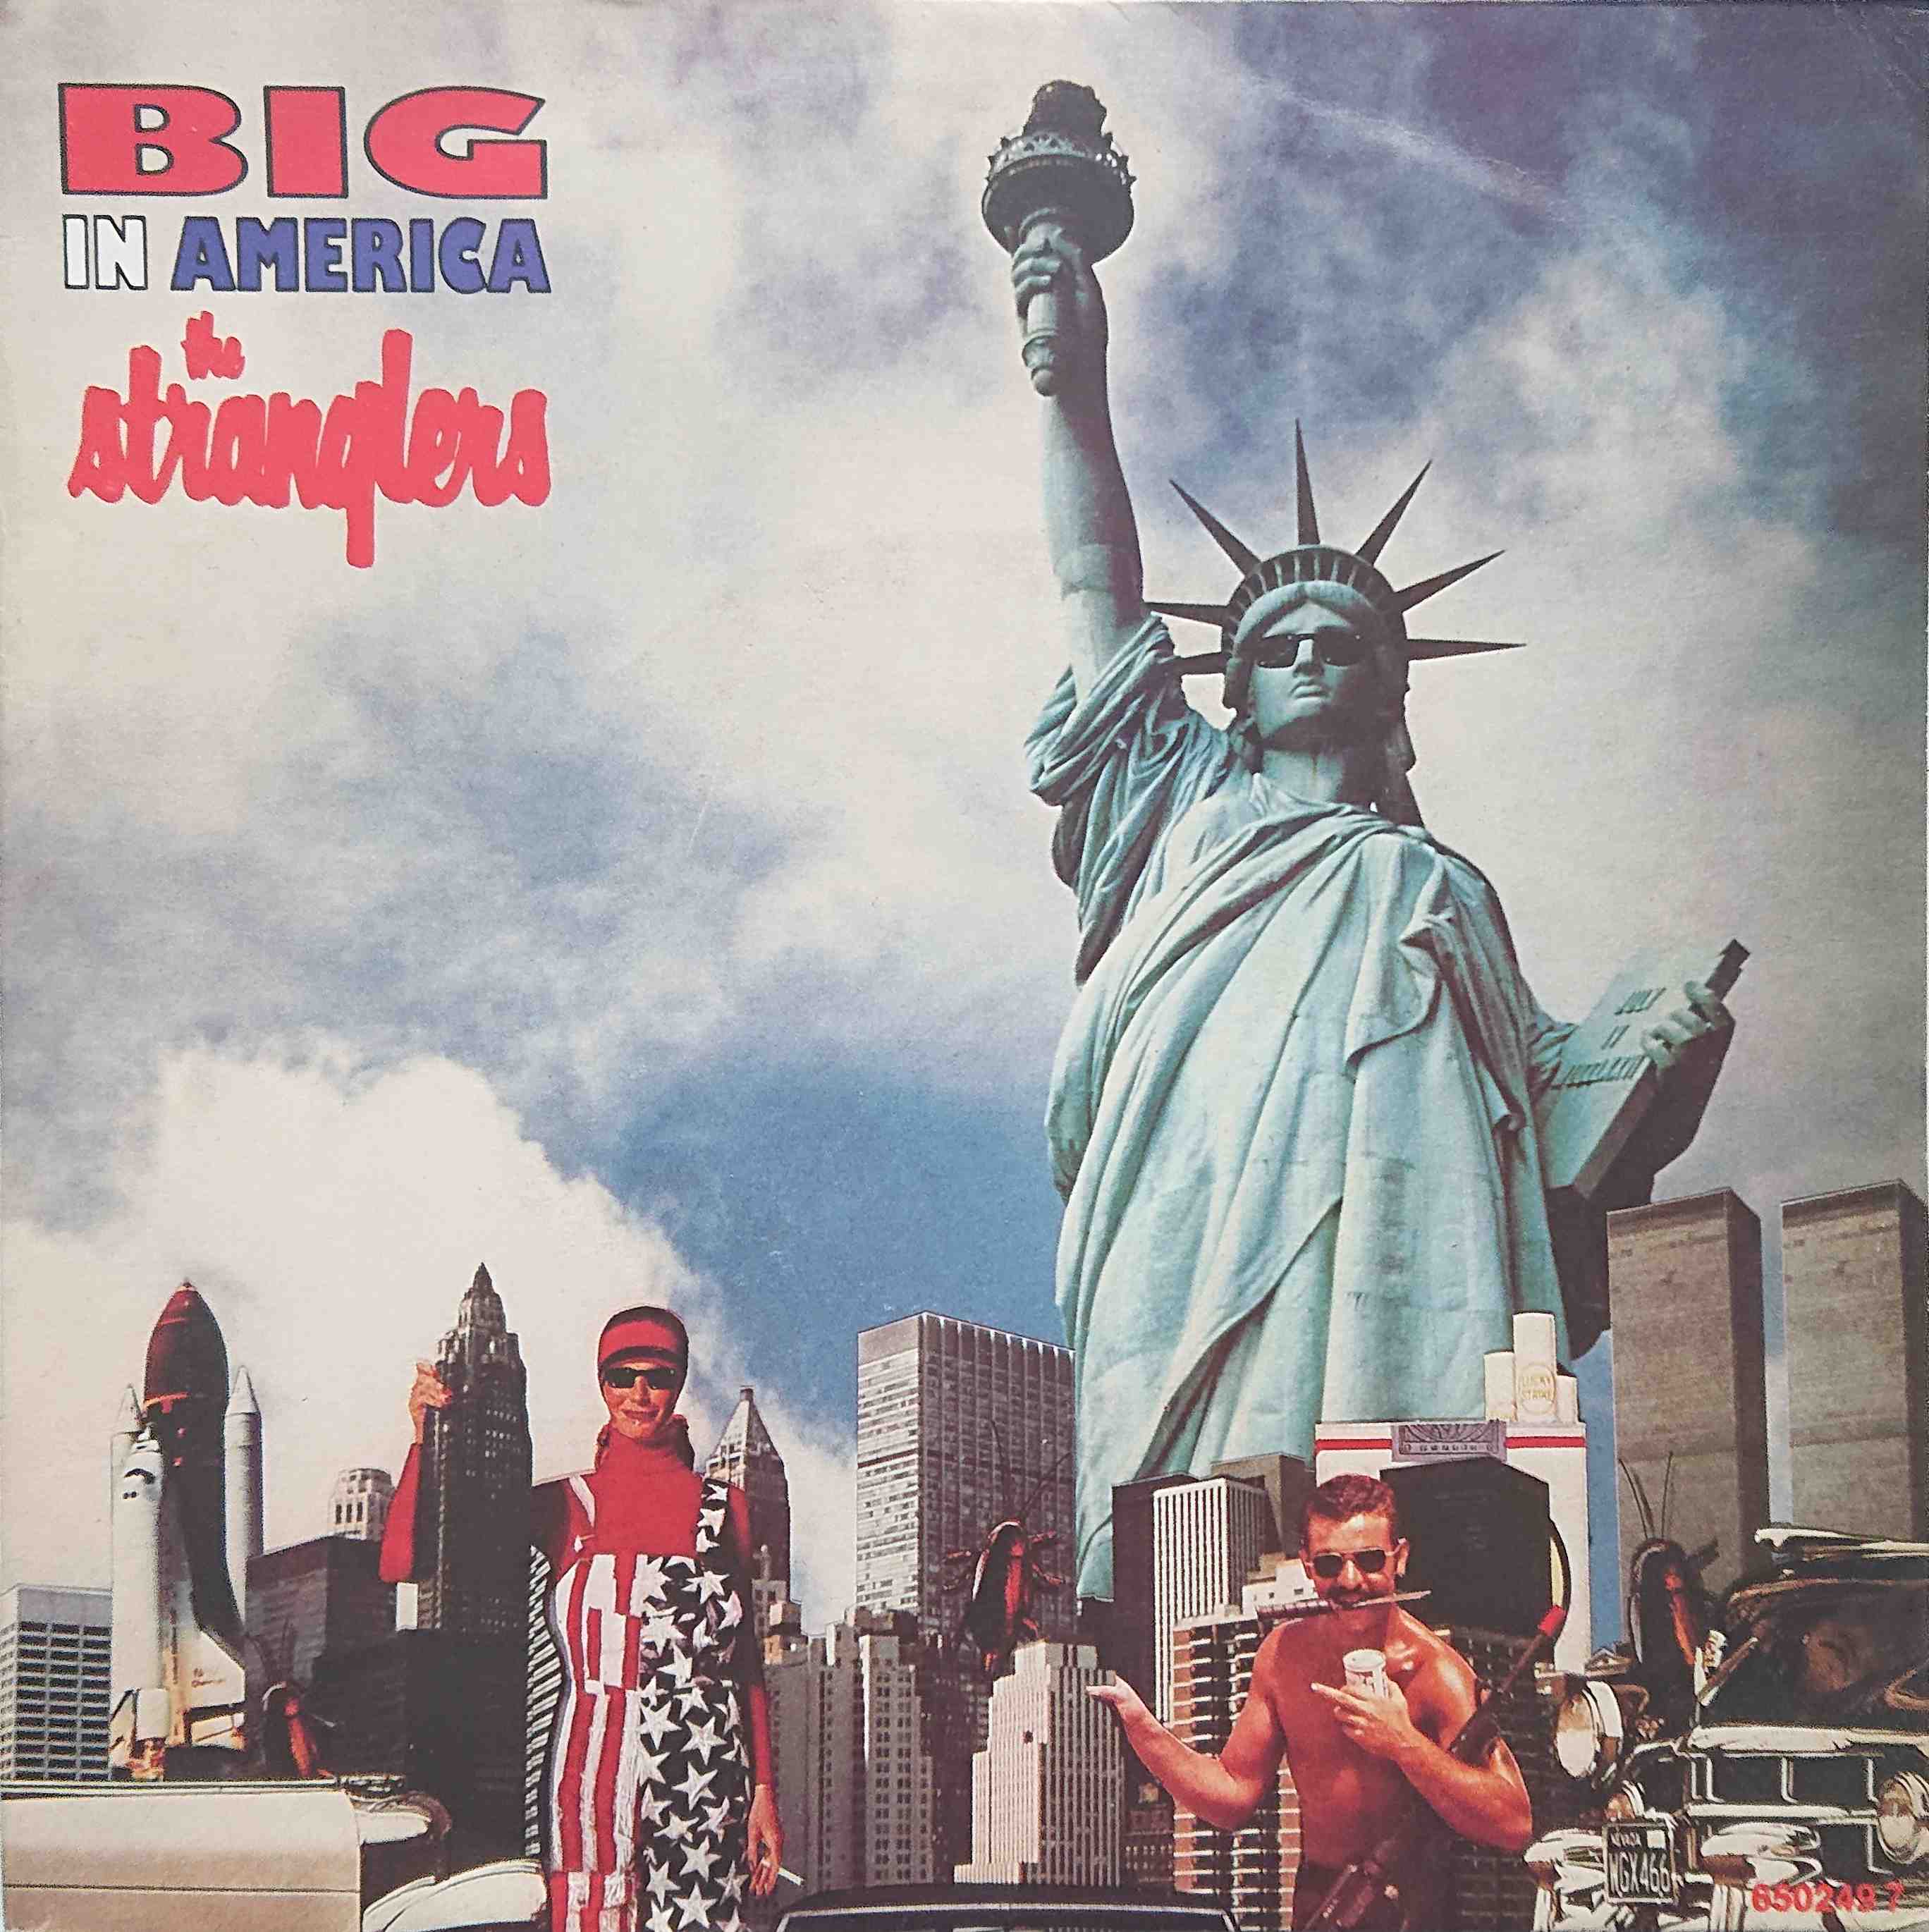 Picture of Big in America by artist The Stranglers from The Stranglers singles